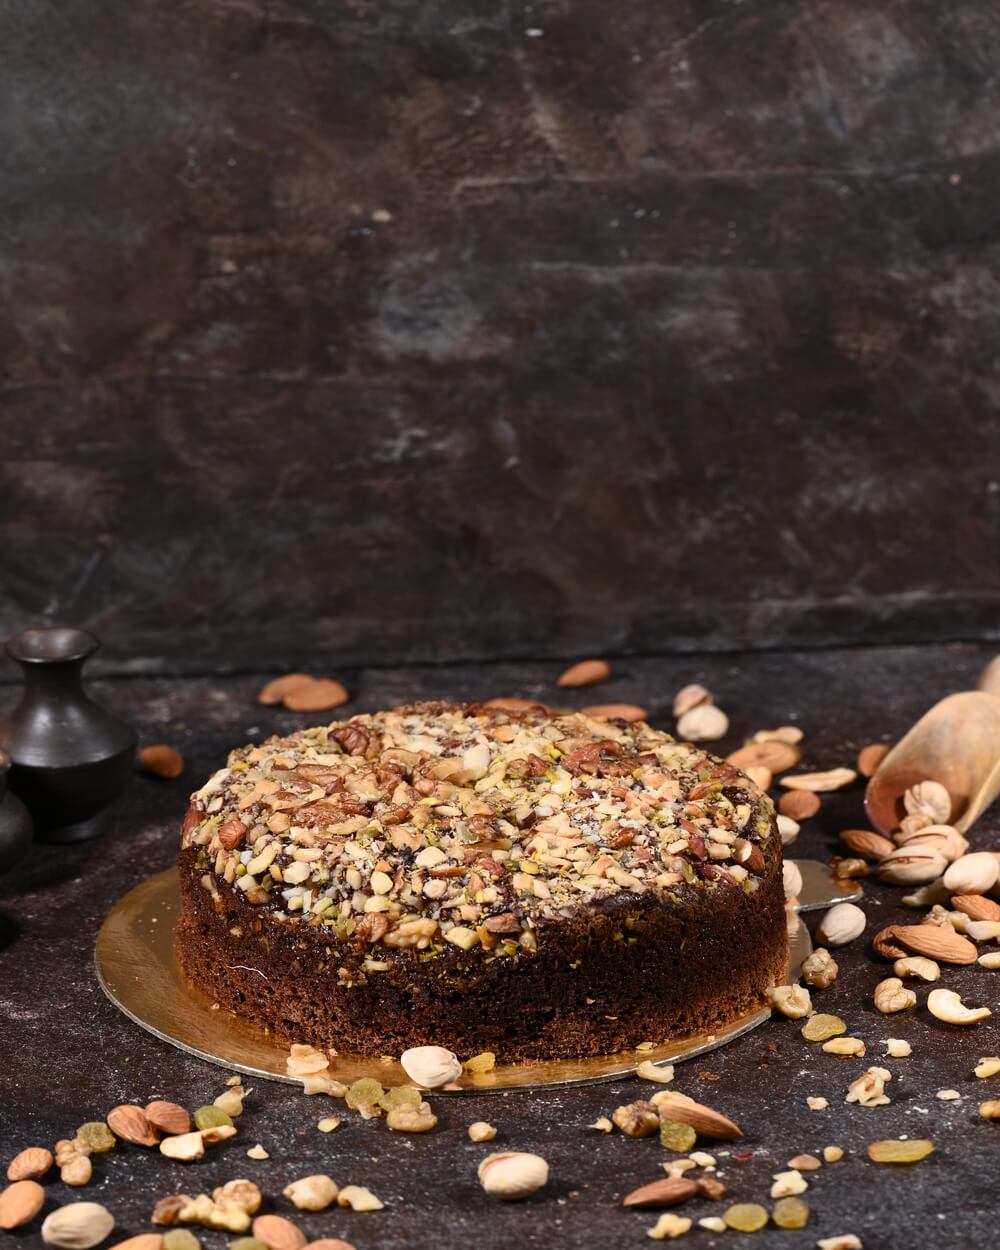 dry fruit ferrero rocher chocolate cake - gifts cake flower gifts delivery